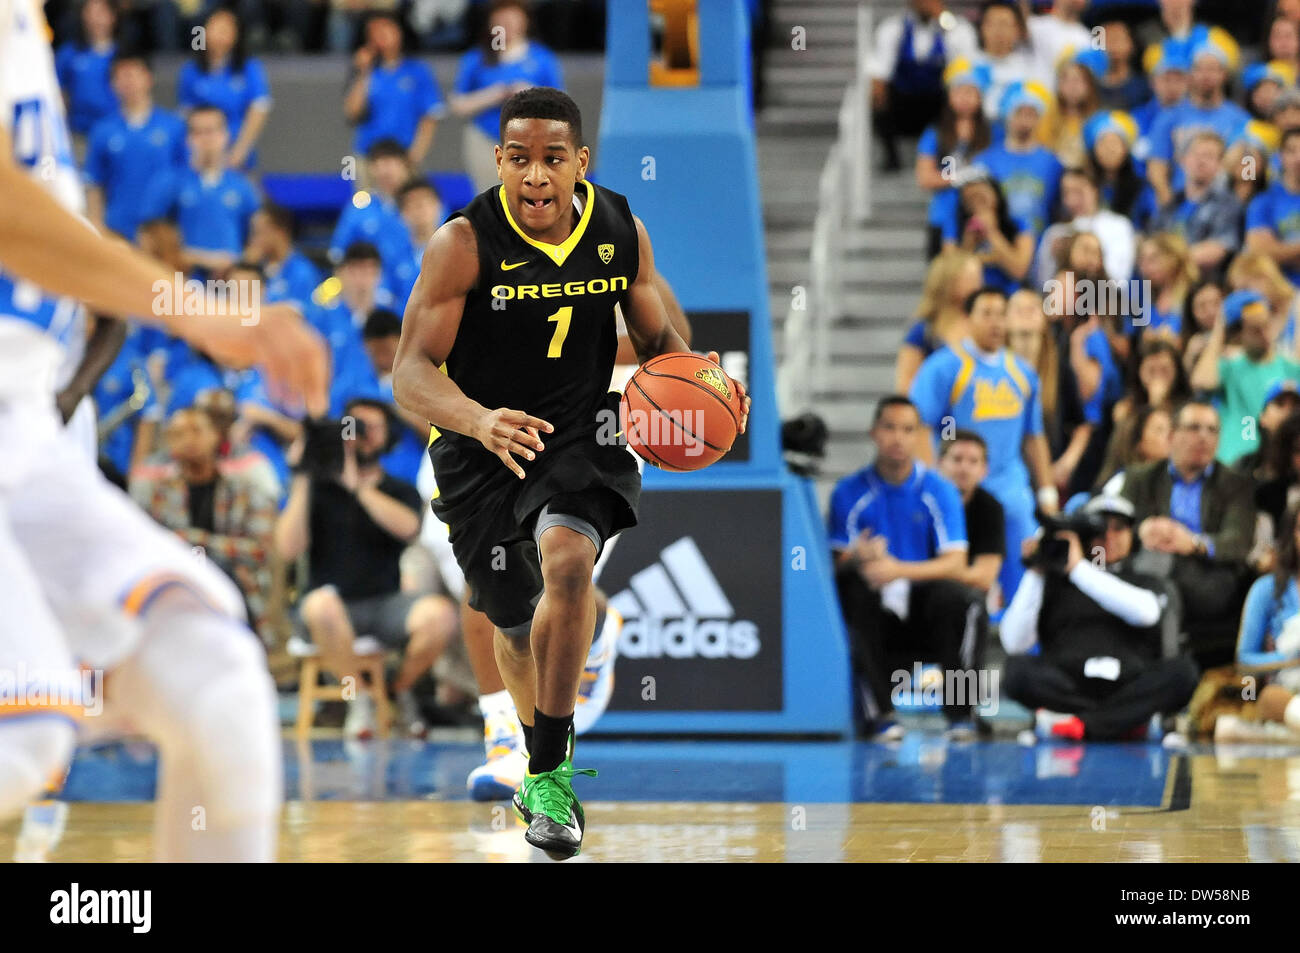 Los Angeles, CA, USA. 27th Feb, 2014. Oregon Ducks guard Dominic Artis #1 moves the ball in the first half during the College Basketball game between the Oregon Ducks and the UCLA Bruins at Pauley Pavilion in Los Angeles, California.Louis Lopez/CSM/Alamy Live News Stock Photo